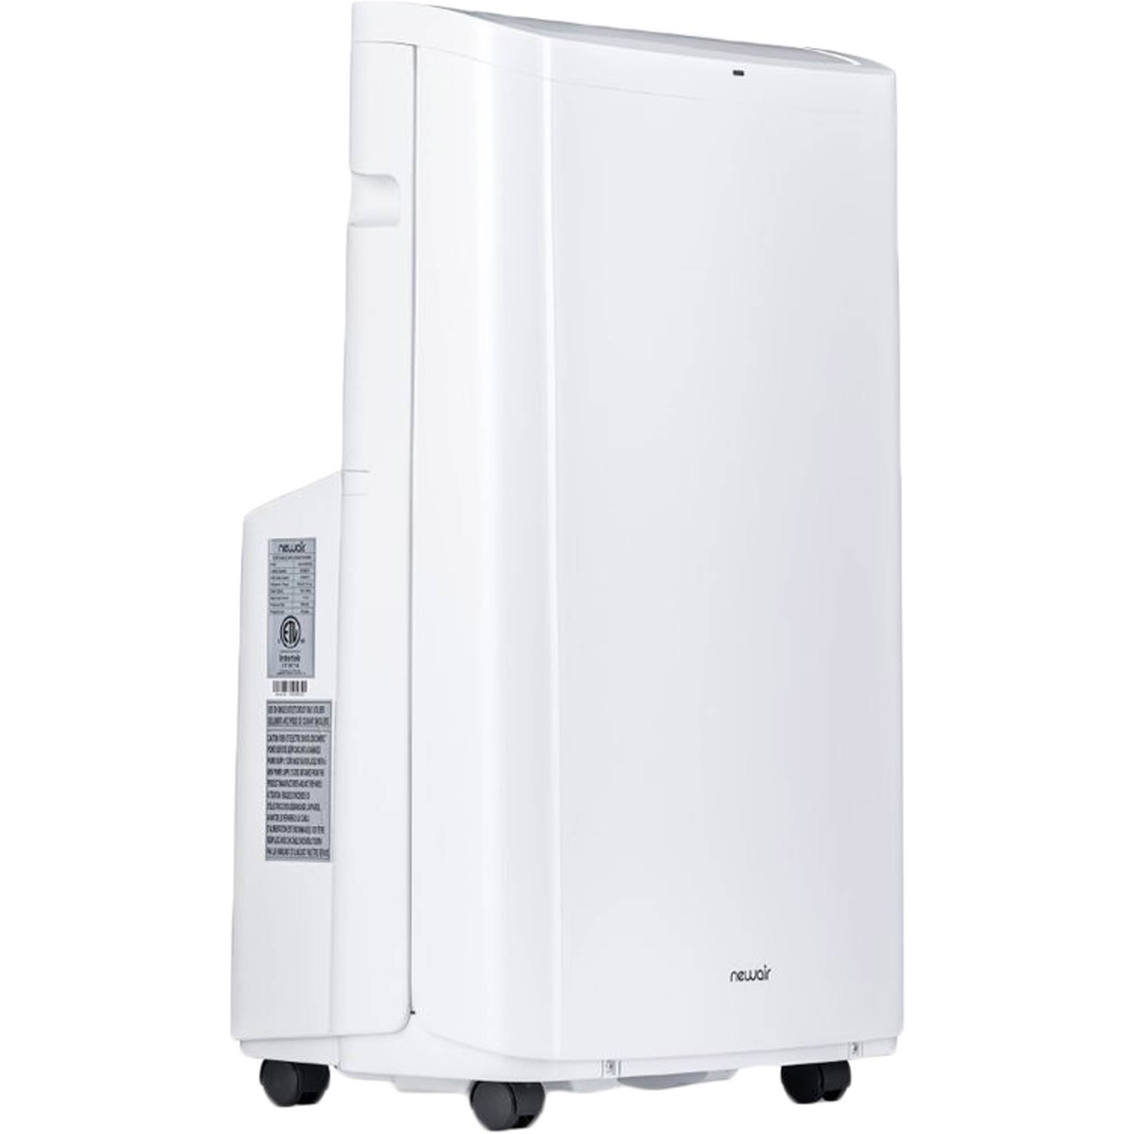 NewAir Compact 14,000 BTU Portable Air Conditioner - Image 3 of 10